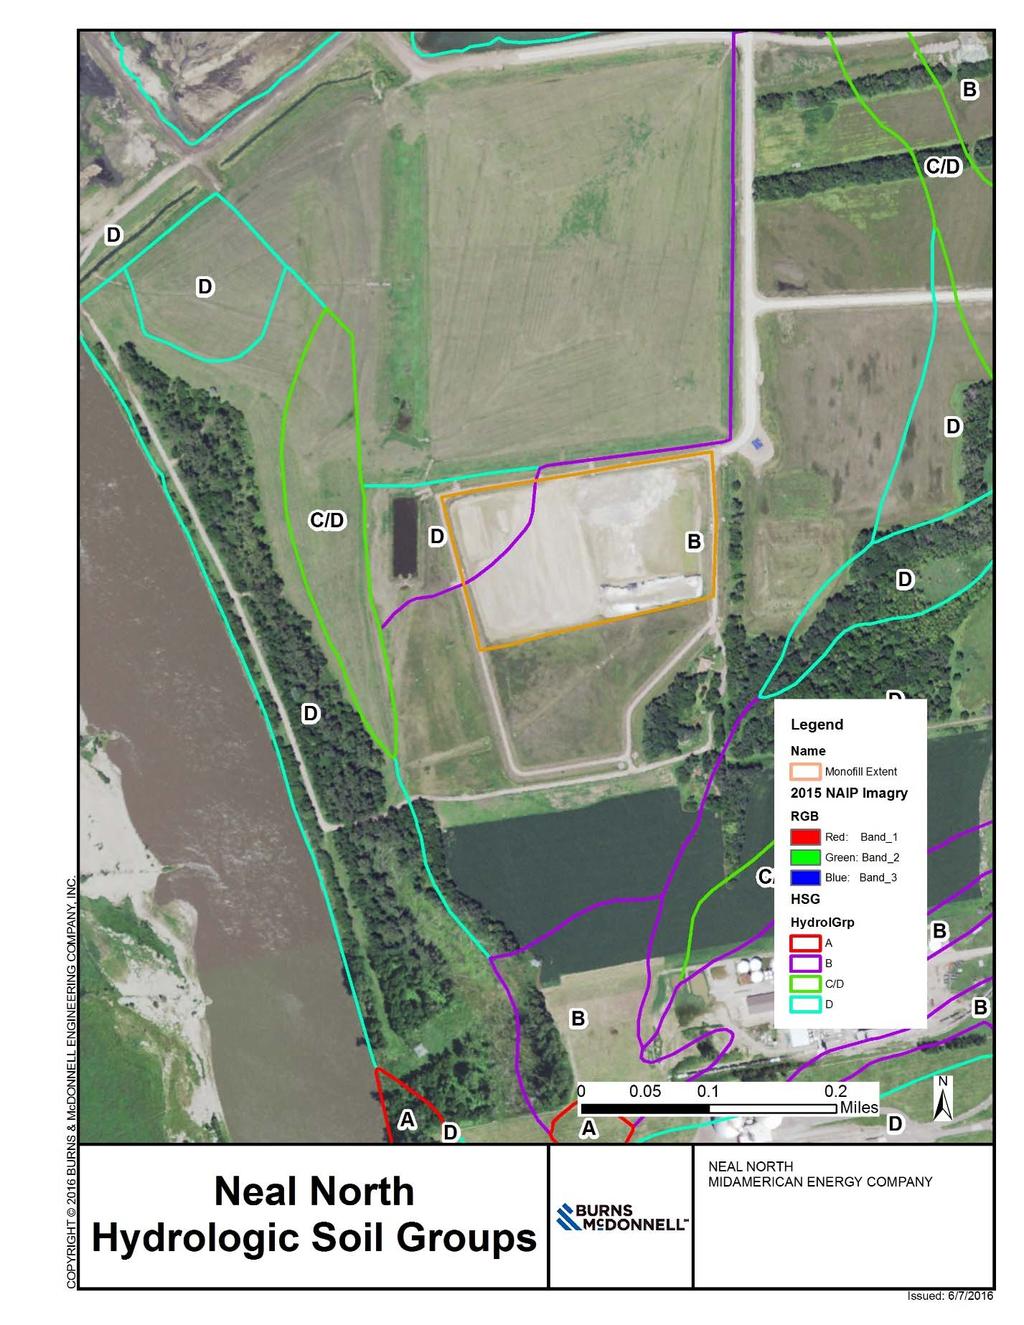 Run-On and Run-Off Control Plan Neal North Energy Center Monofill Site Hydrology